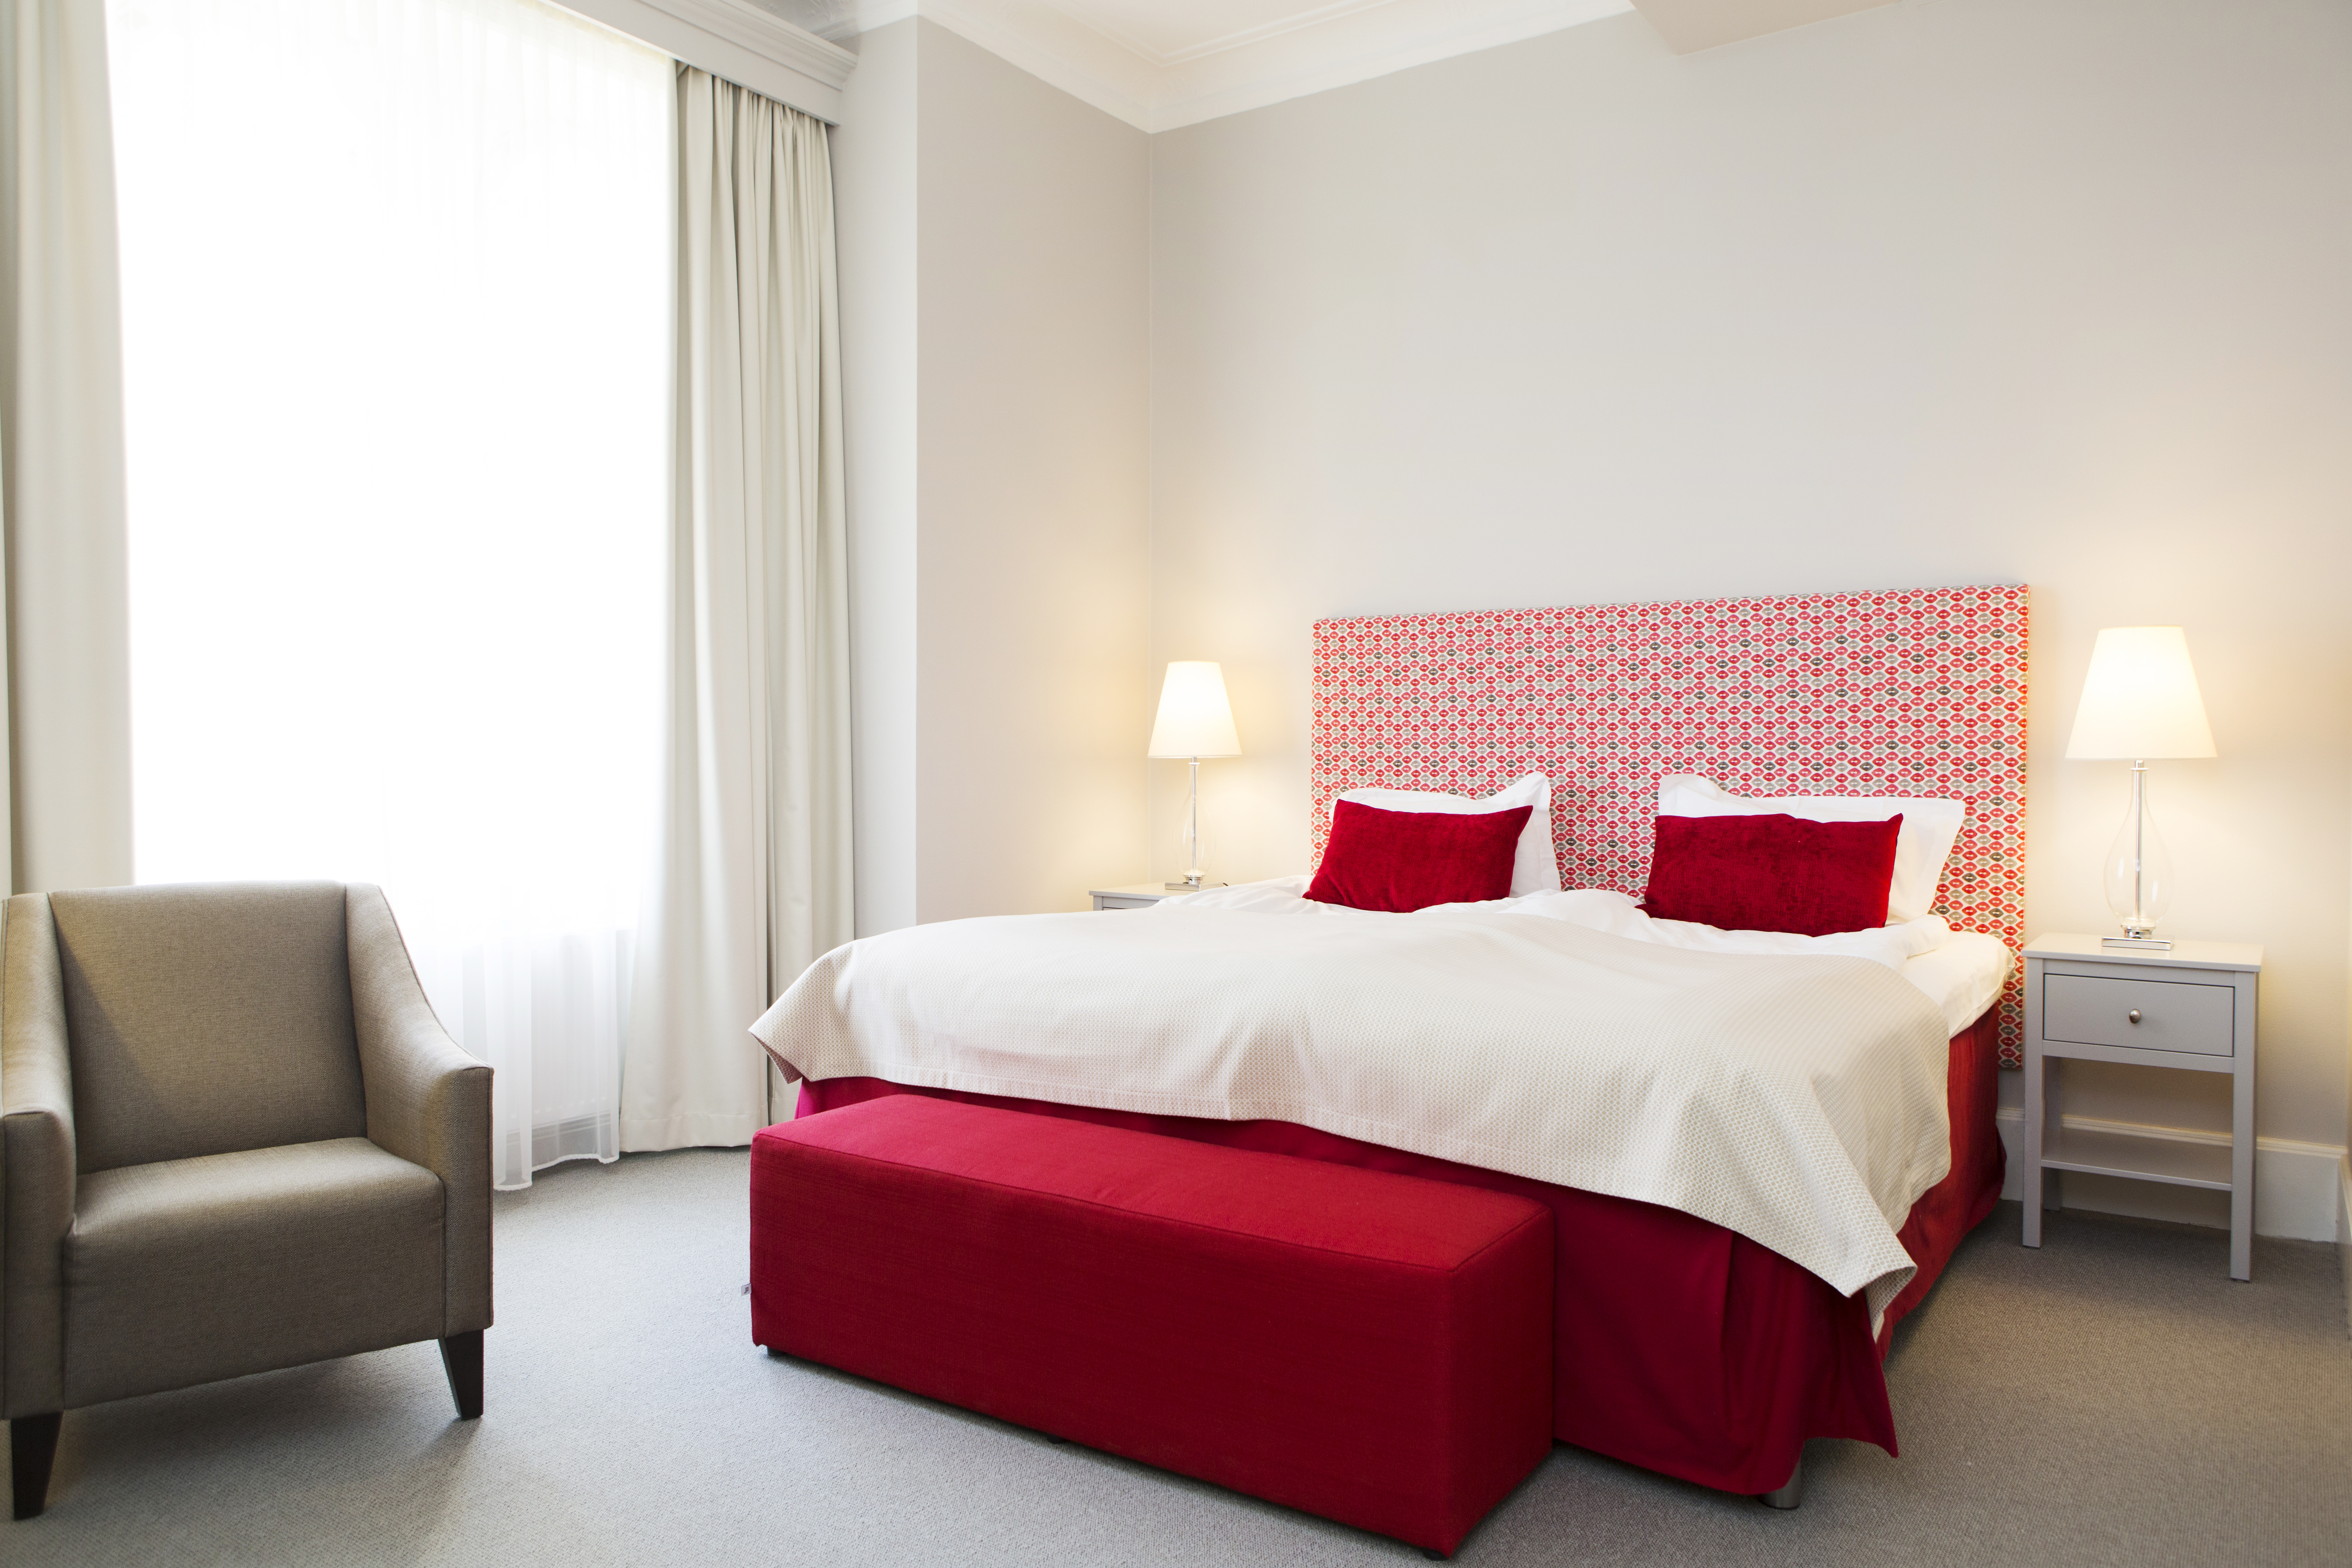 Bright hotel room with bed, red headboard and armchair